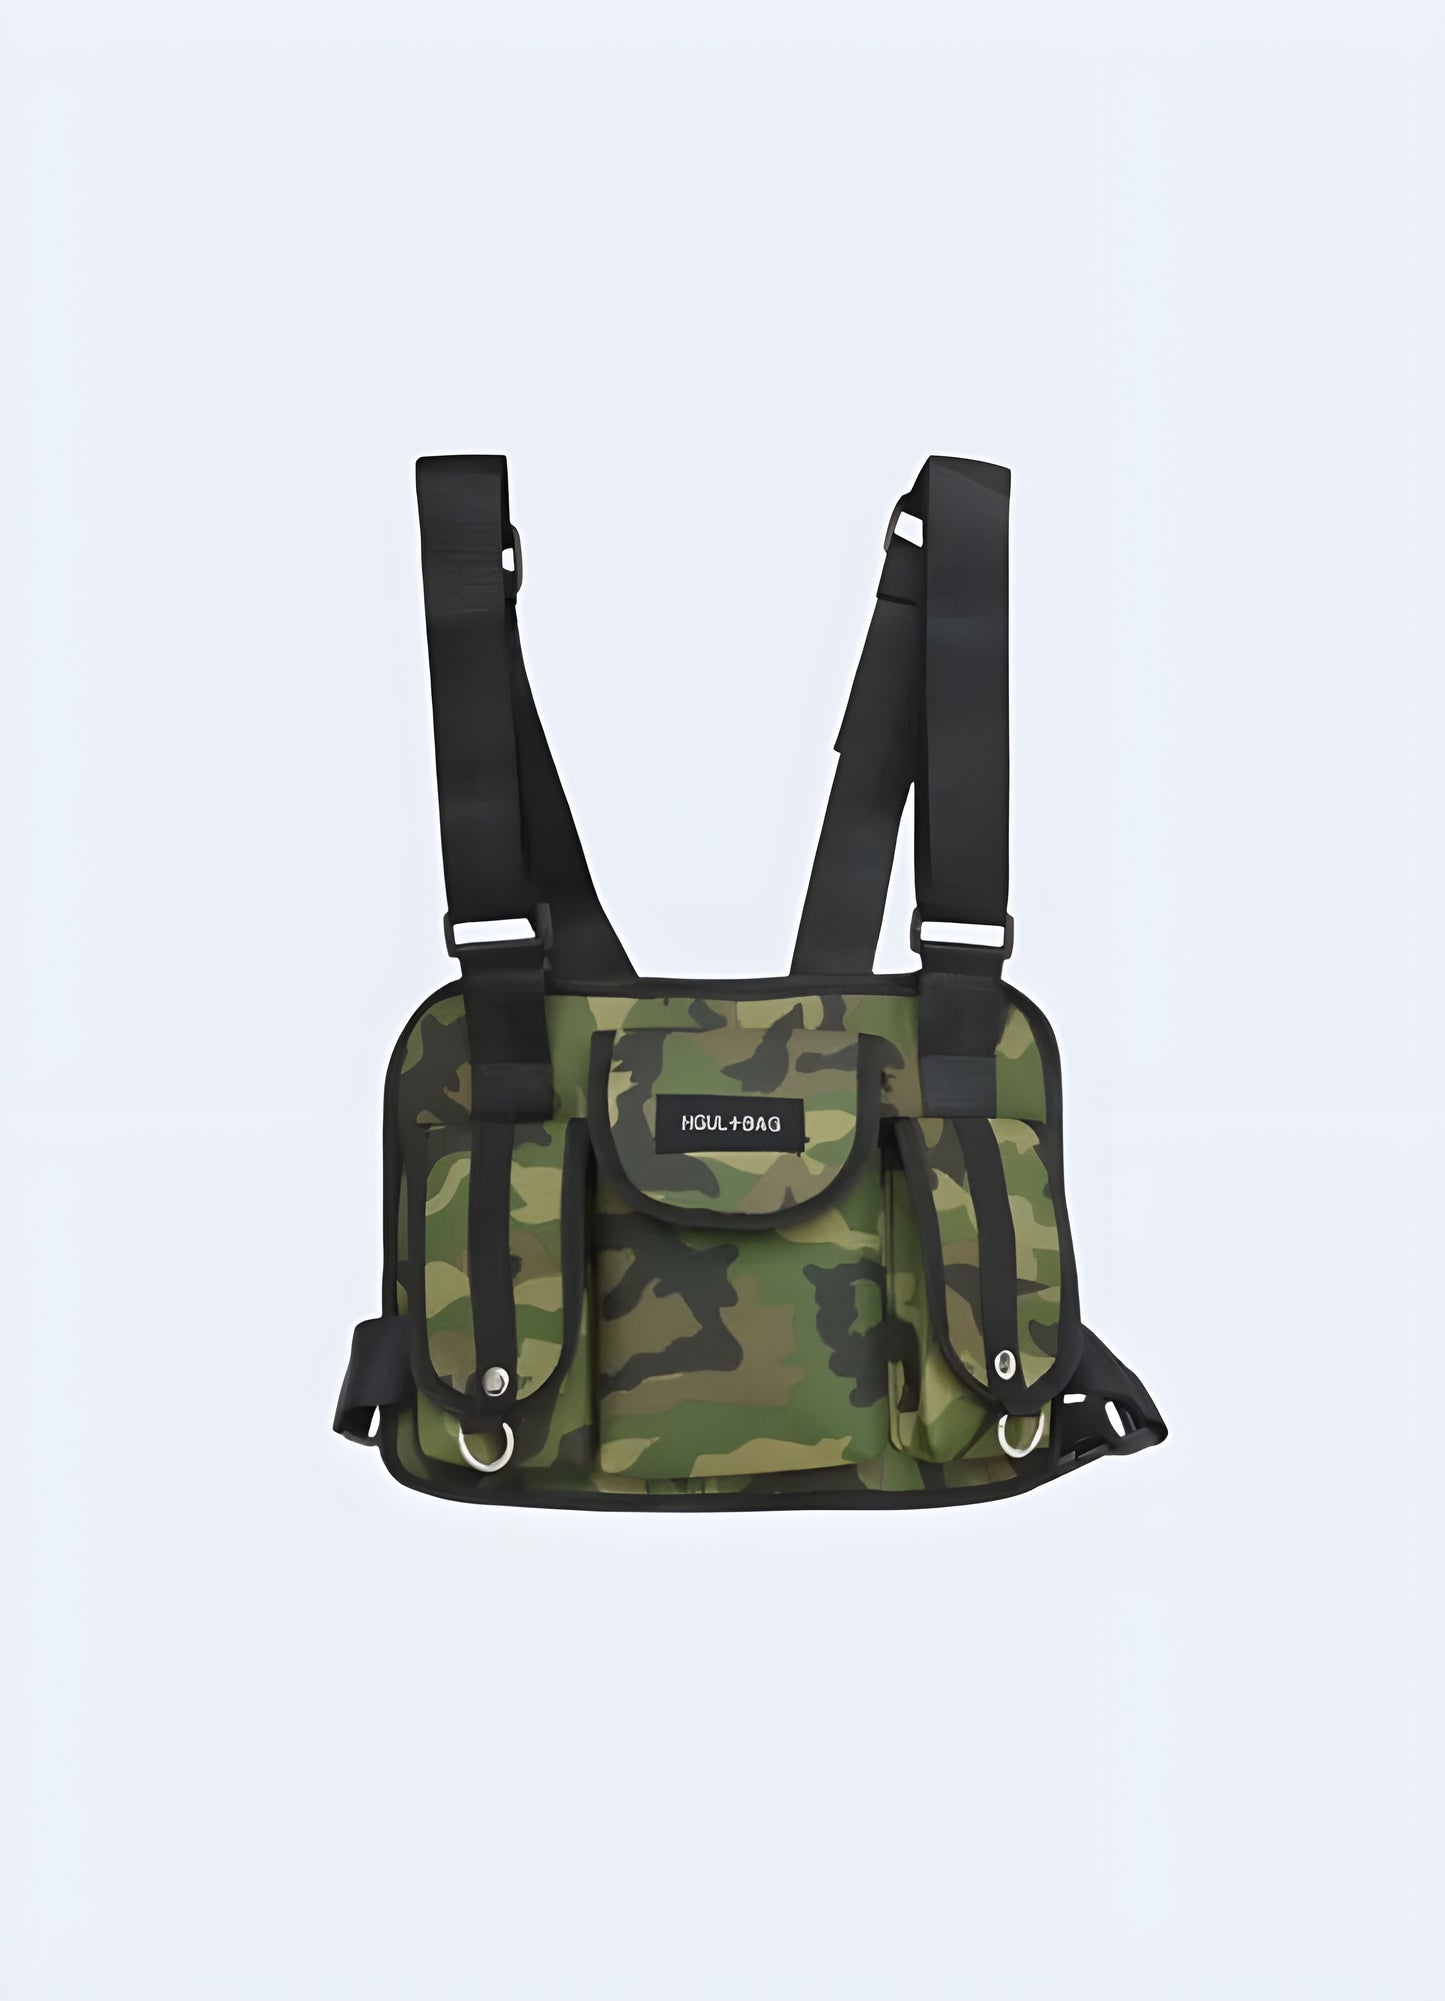 In addition, the bag is made of polyester fiber which is breathable, and easy to carry heavy objects.